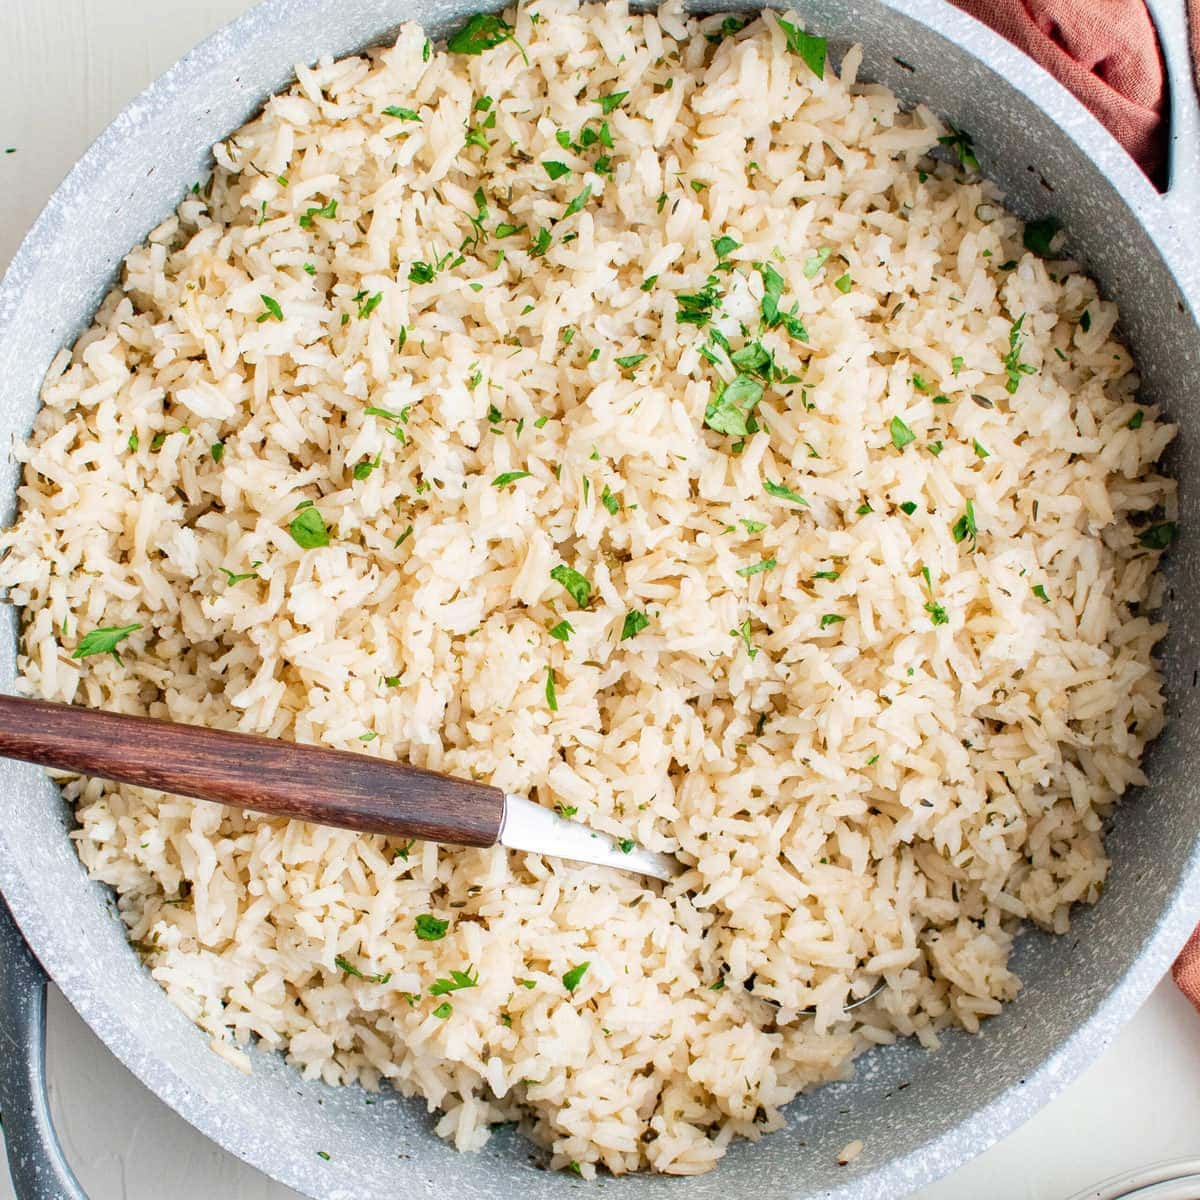 Perfect Steamed Rice Every Time Recipe - Low-cholesterol.